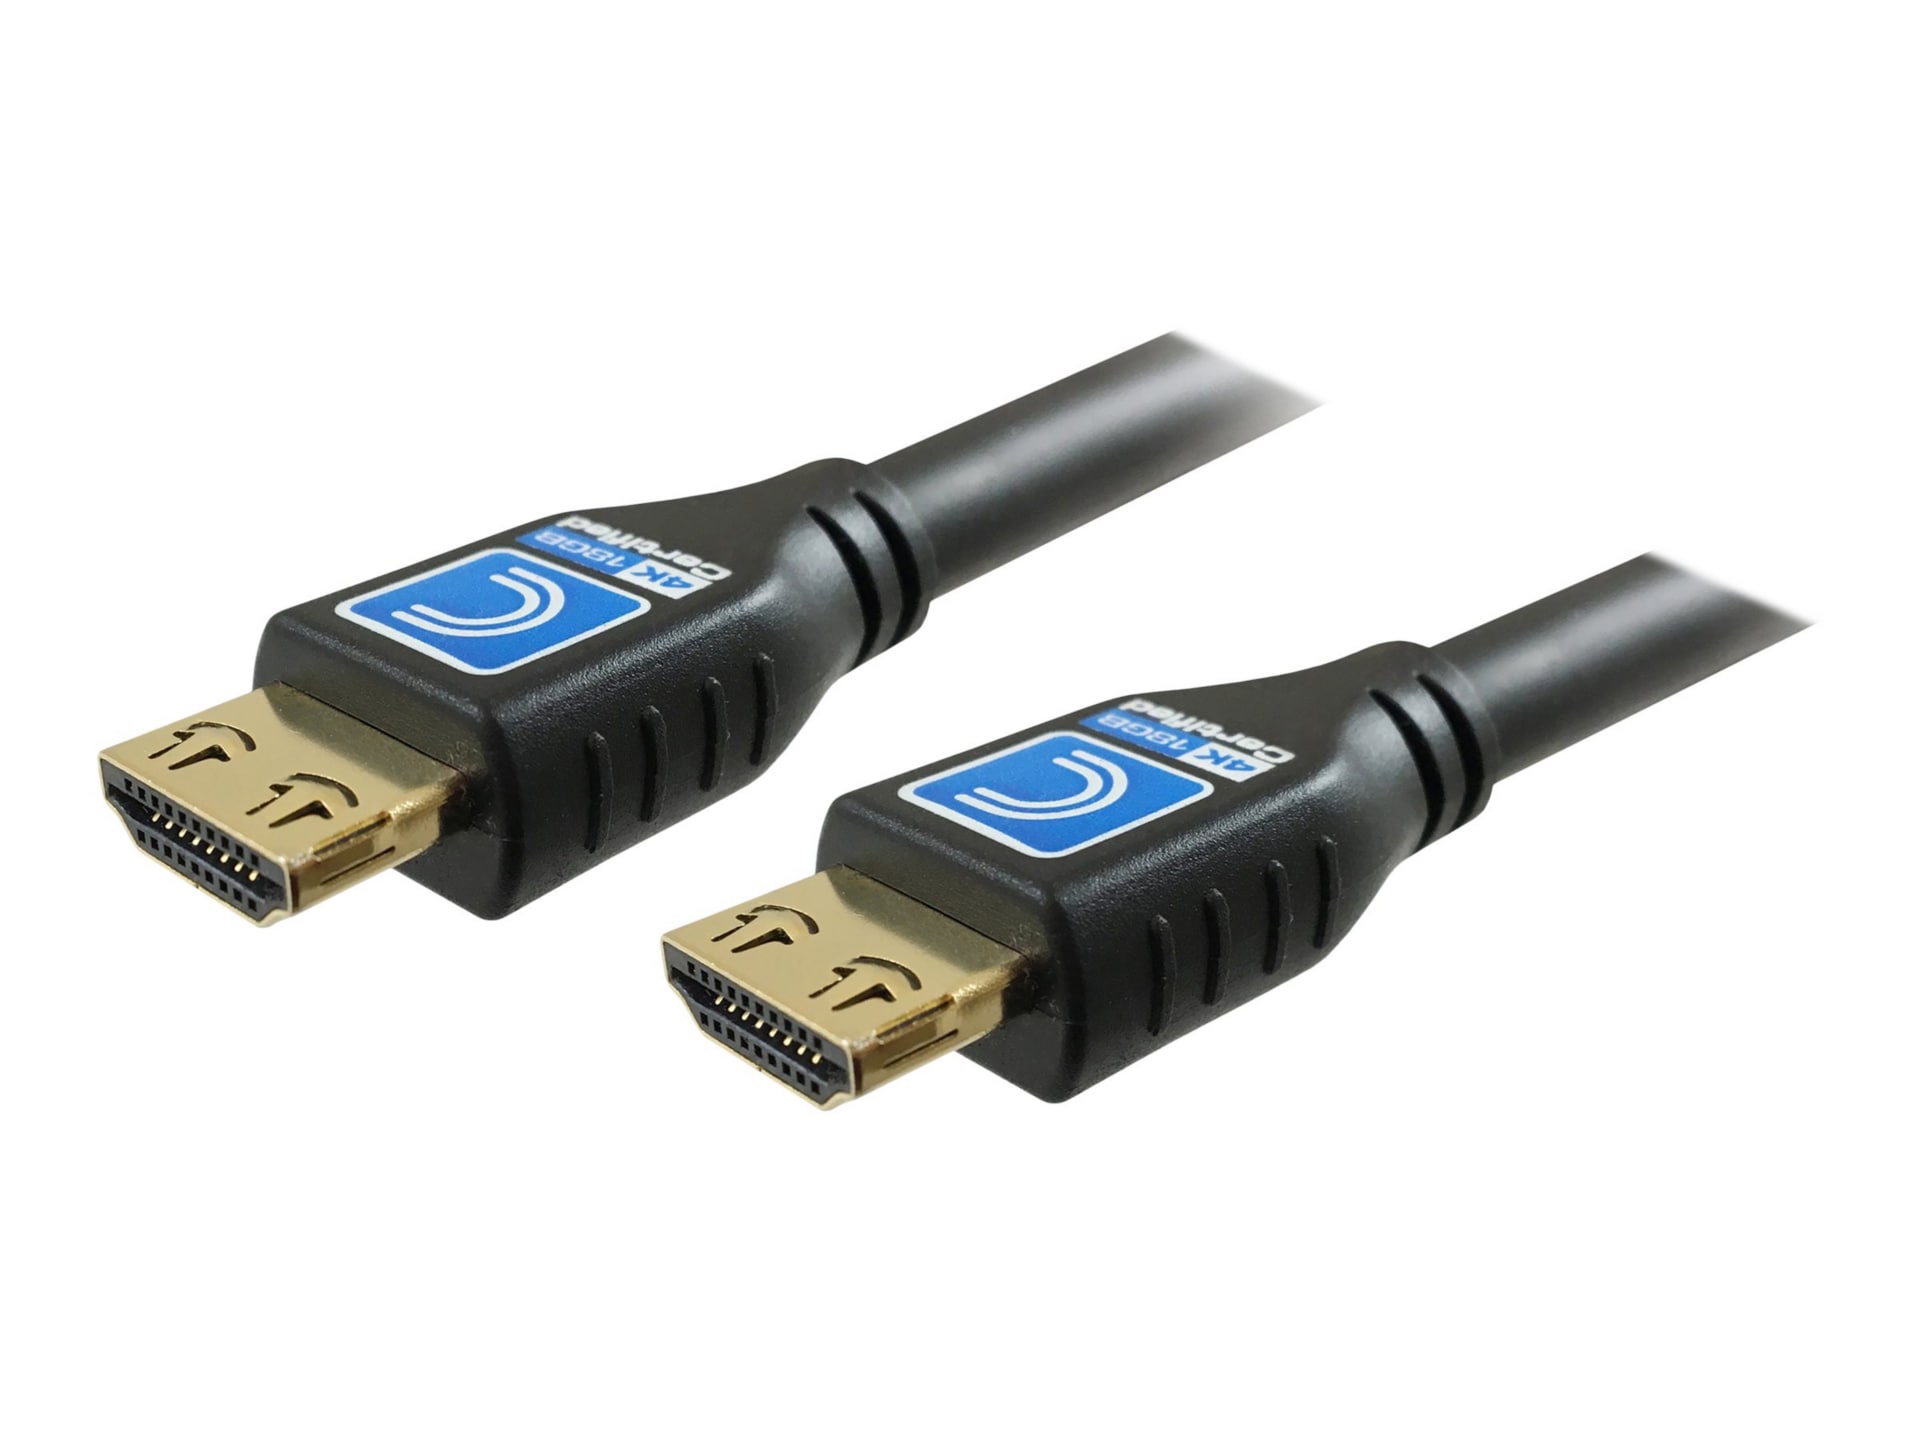 Comprehensive Pro AV/IT Certified 18Gb 4K High Speed HDMI Cable with ProGrip - HDMI cable with Ethernet - 50 ft